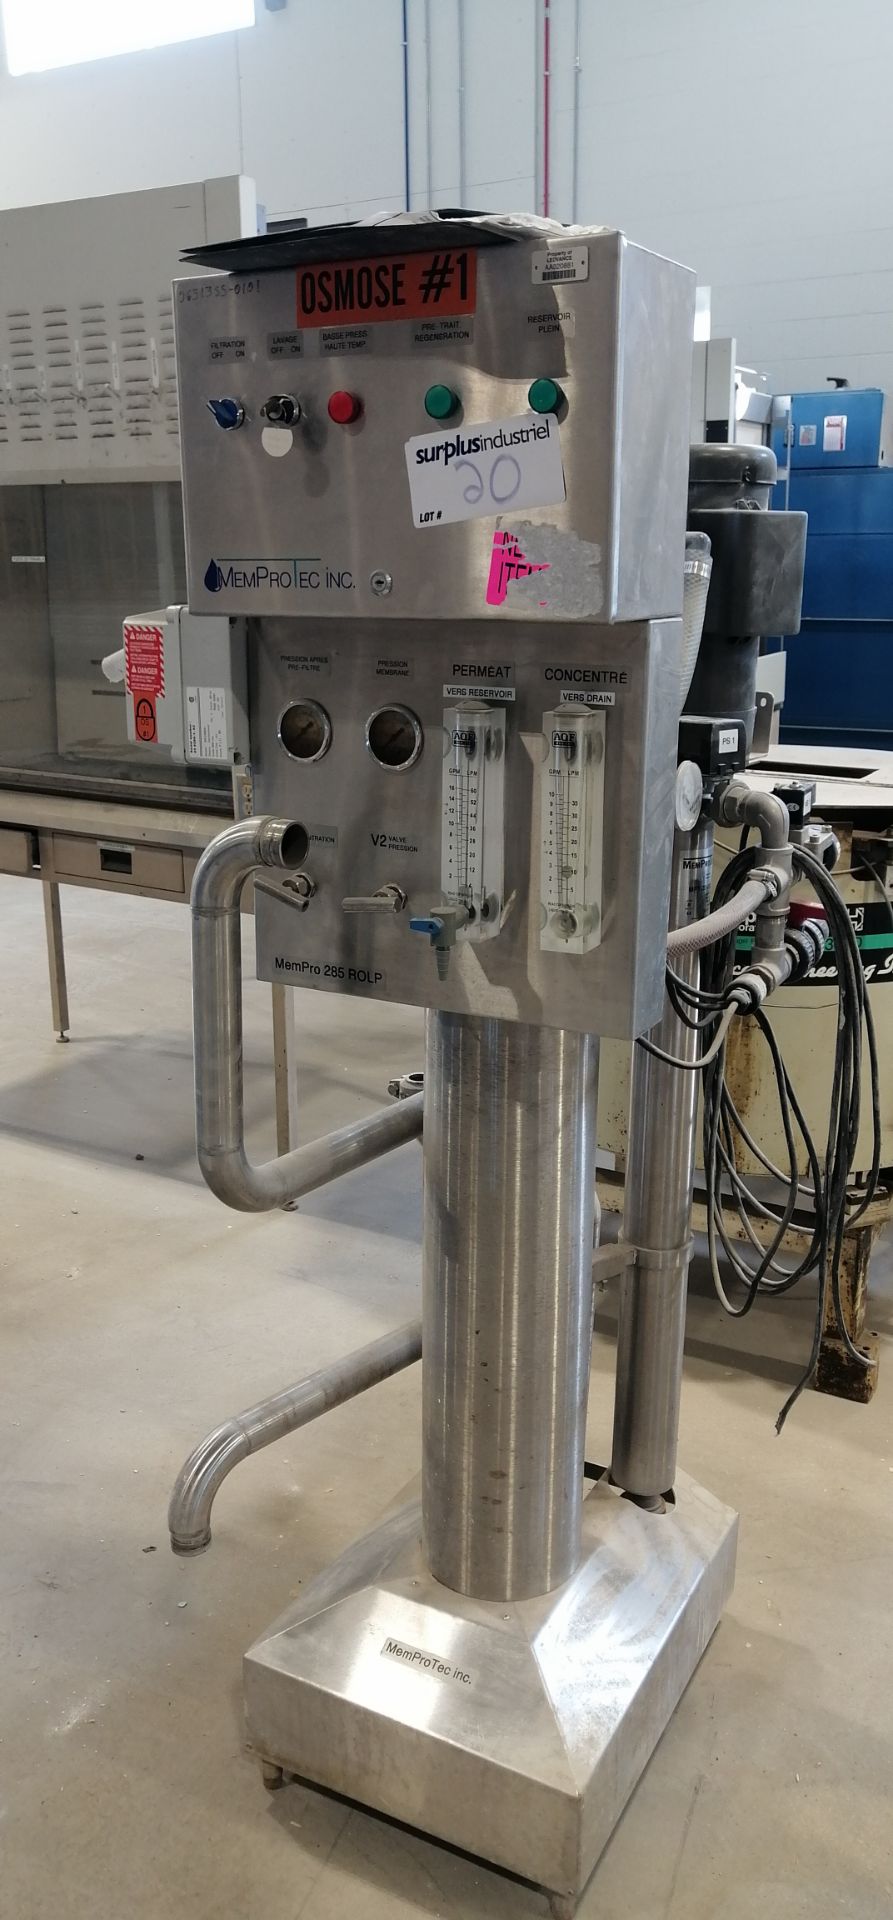 MemPro Series Stainless Steel Reverse osmosis or nanofiltration system Model:285-ROLP - Image 2 of 13